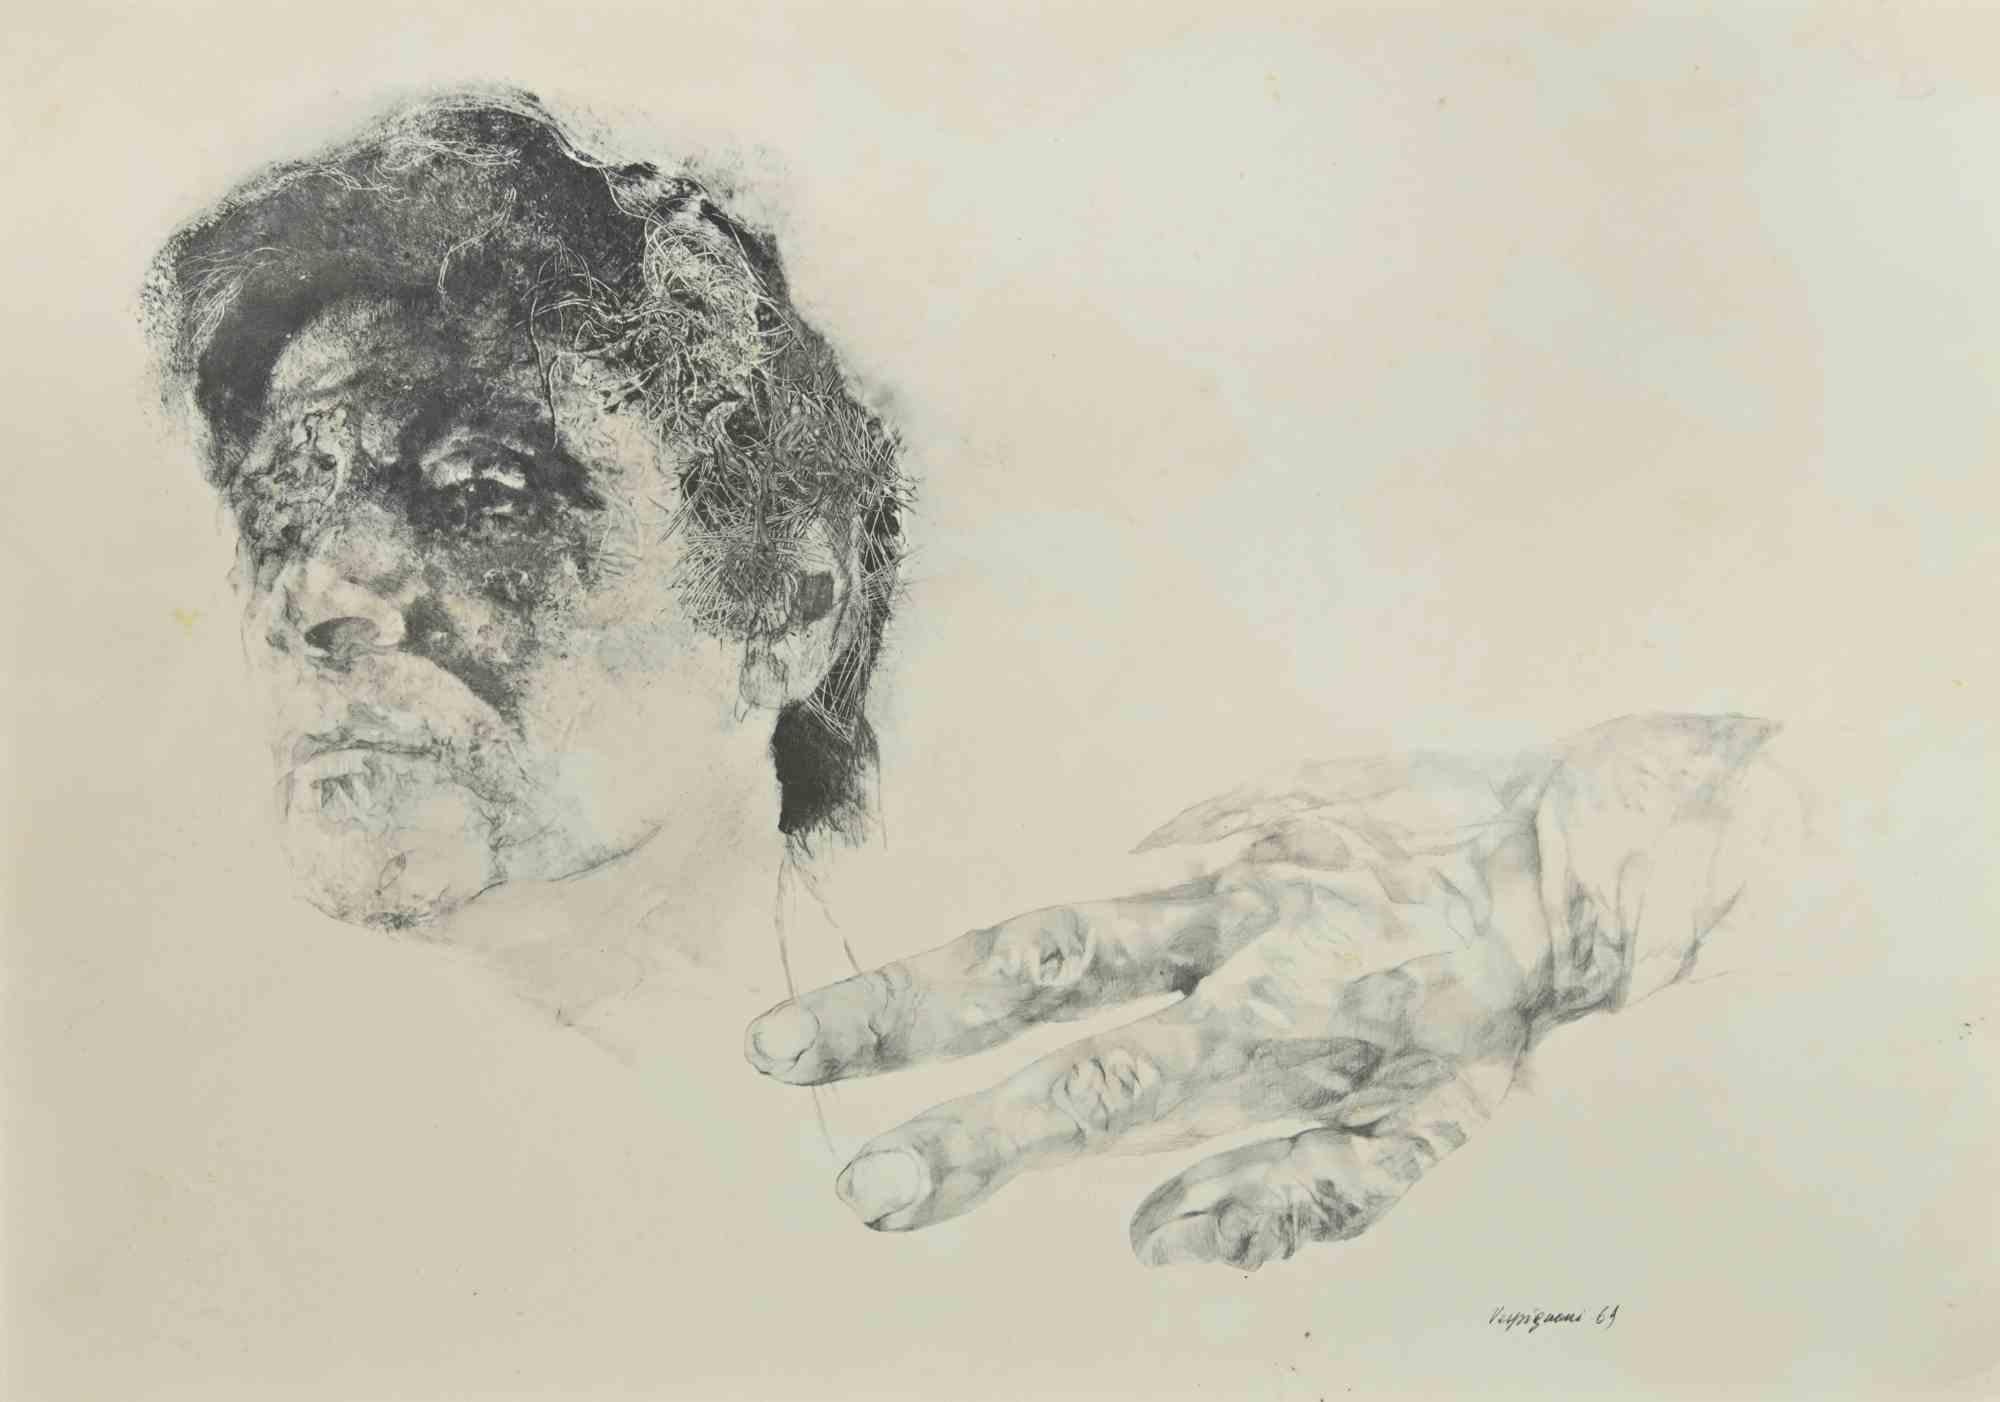 Portrait is a phototype print reproducing drawing by Renzo Vespignani of the 1960s

Signed on the plate lower right.

The artwork is depicted through strong strokes and perfect hatchings.